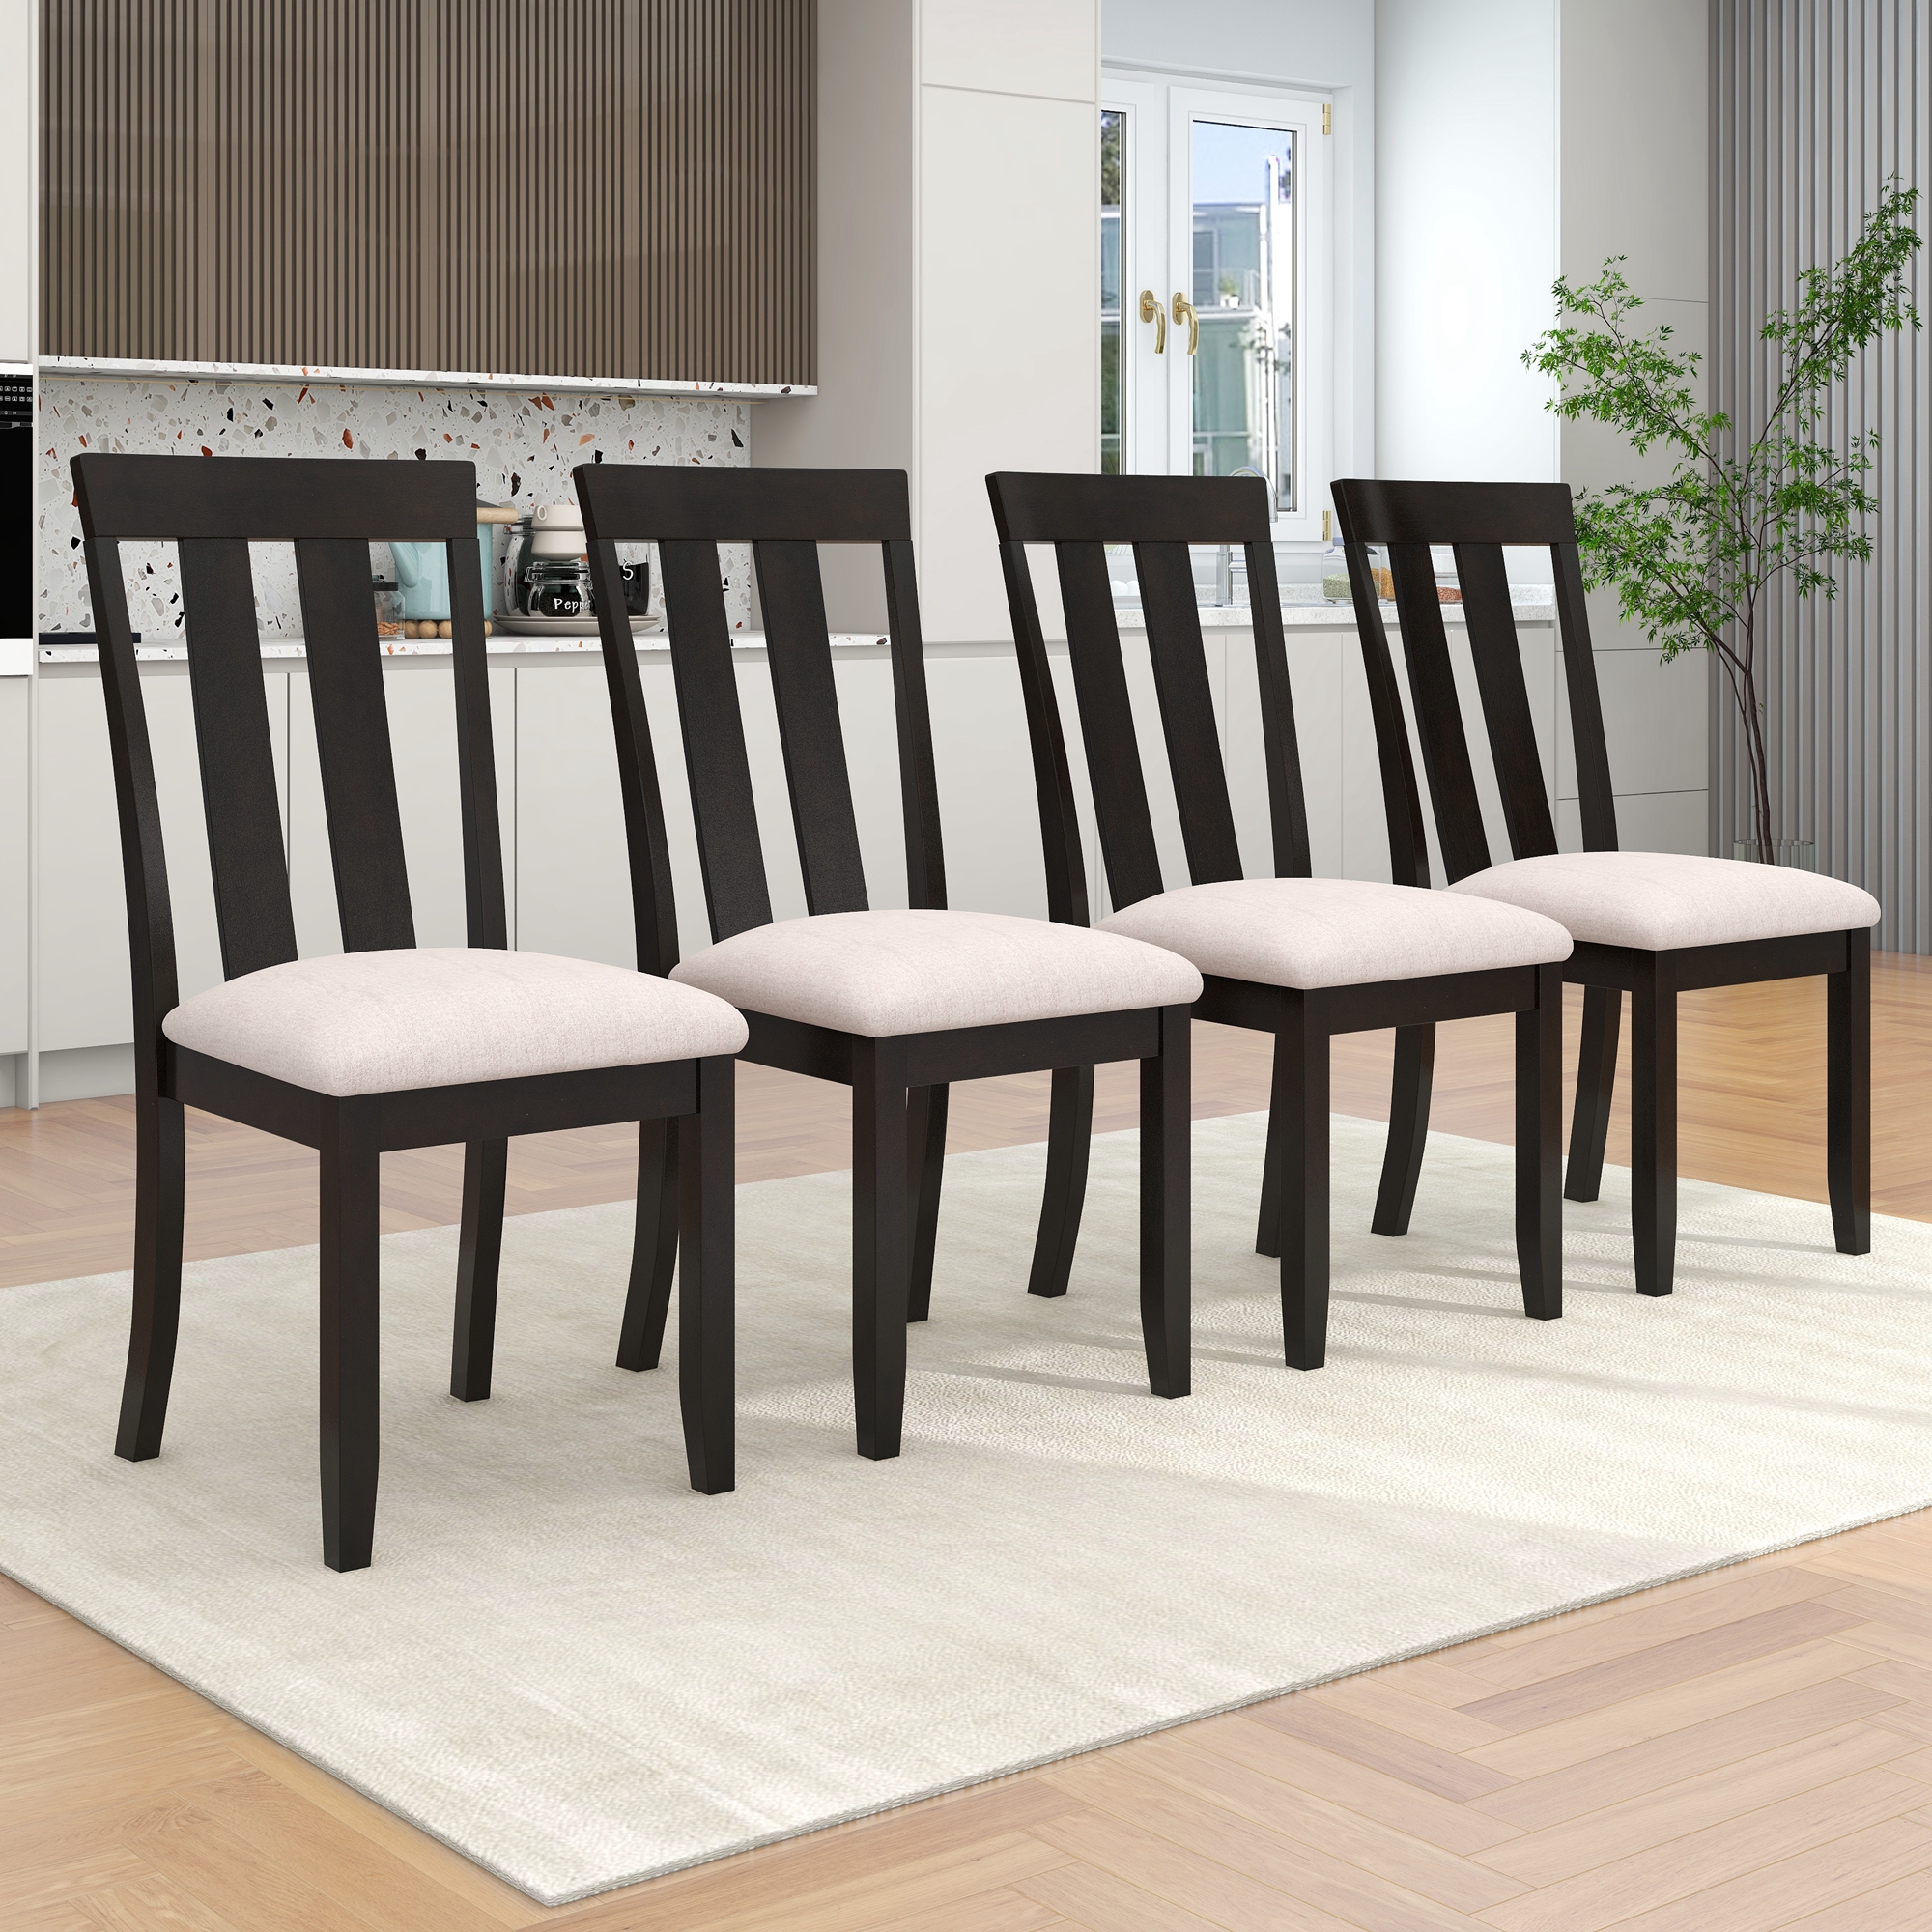 TREXM Set of 4 Dining Chairs Soft Fabric Dining Room Chairs with Seat Cushions and Curved Back  (Espresso)